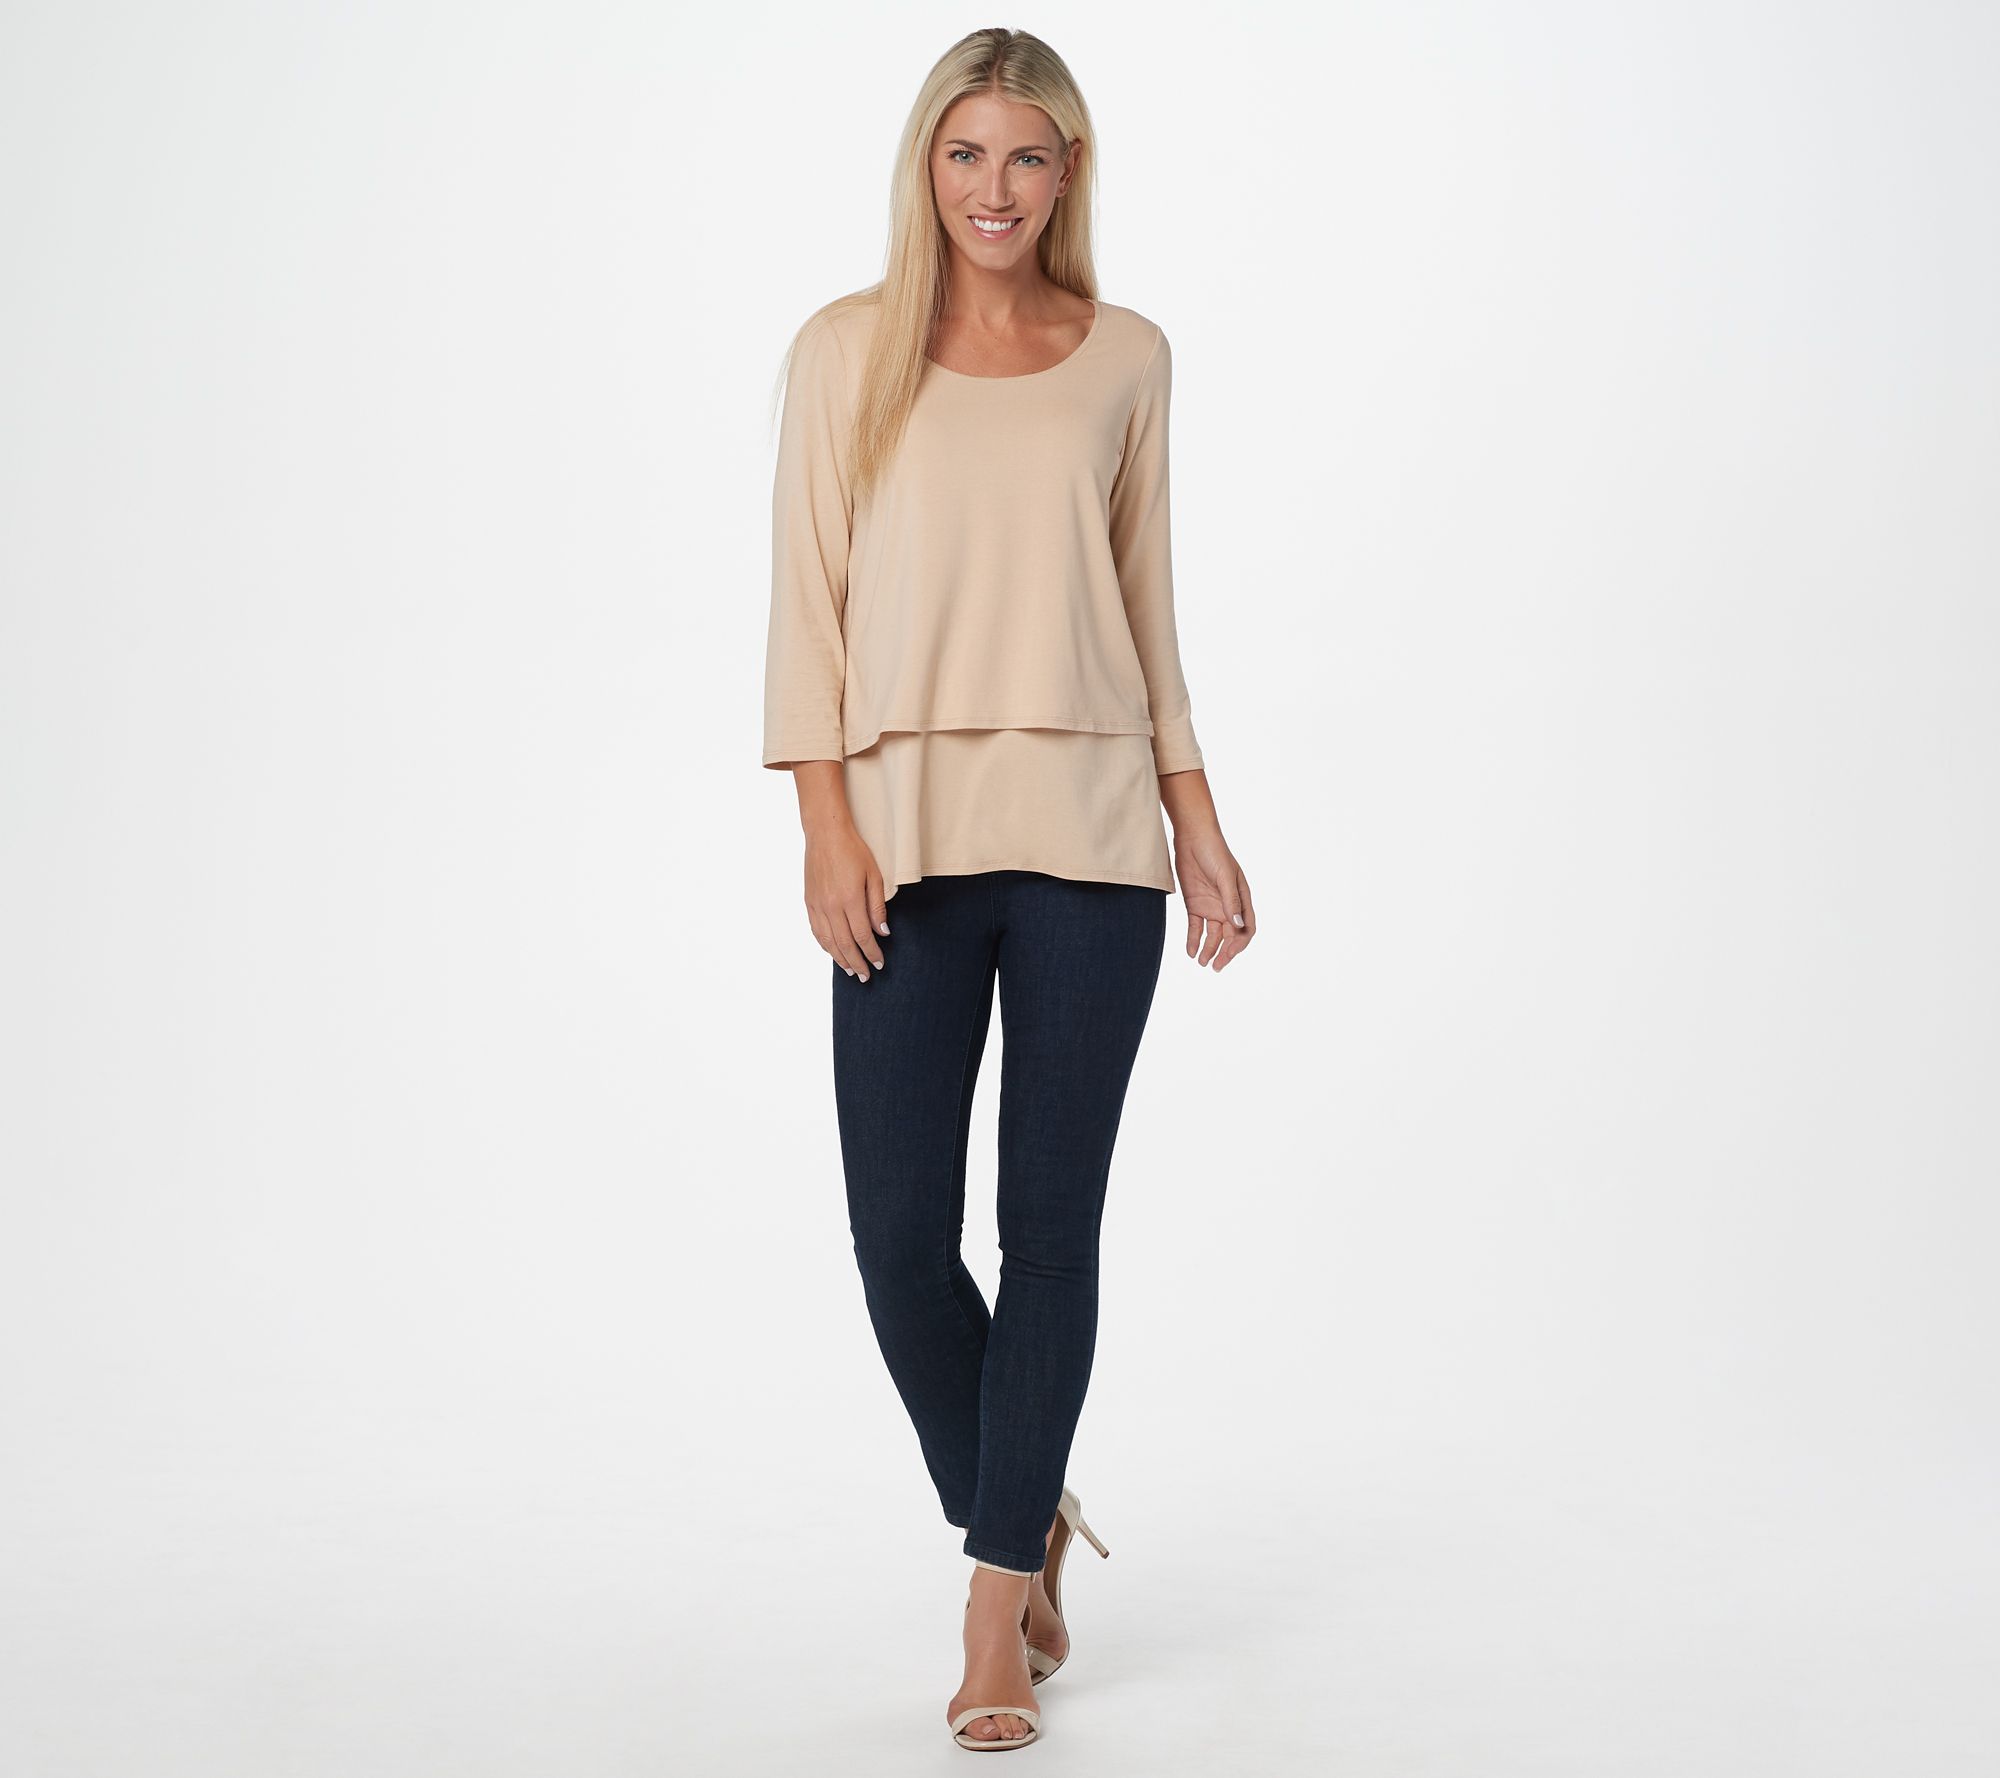 Joan Rivers Jersey Knit Layered Top with 3/4 Sleeves - QVC.com